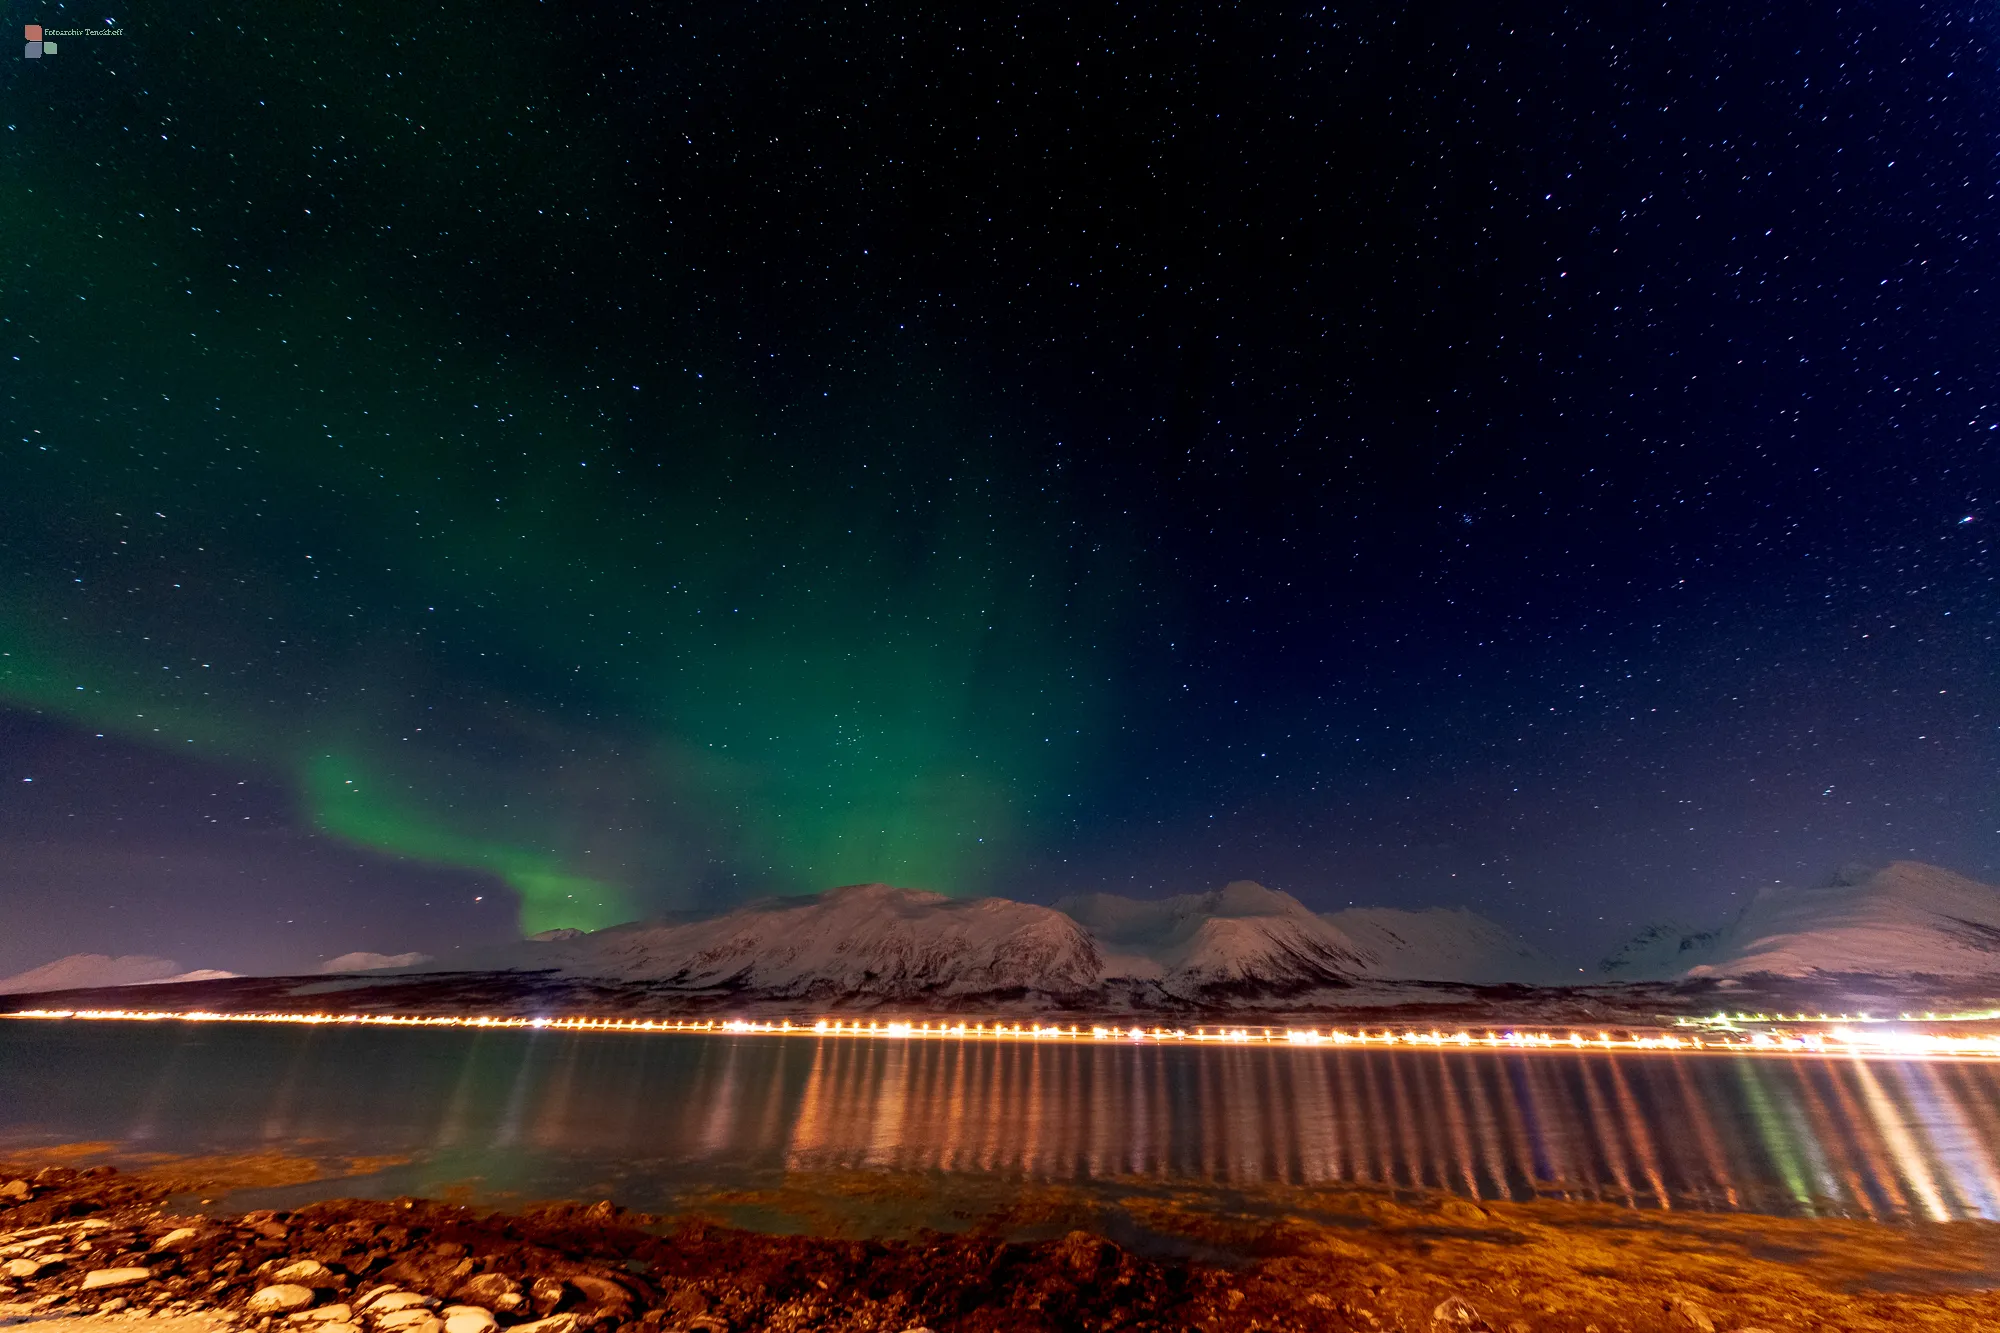 Pictures of northern lights | Photo Archive Tenckhoff